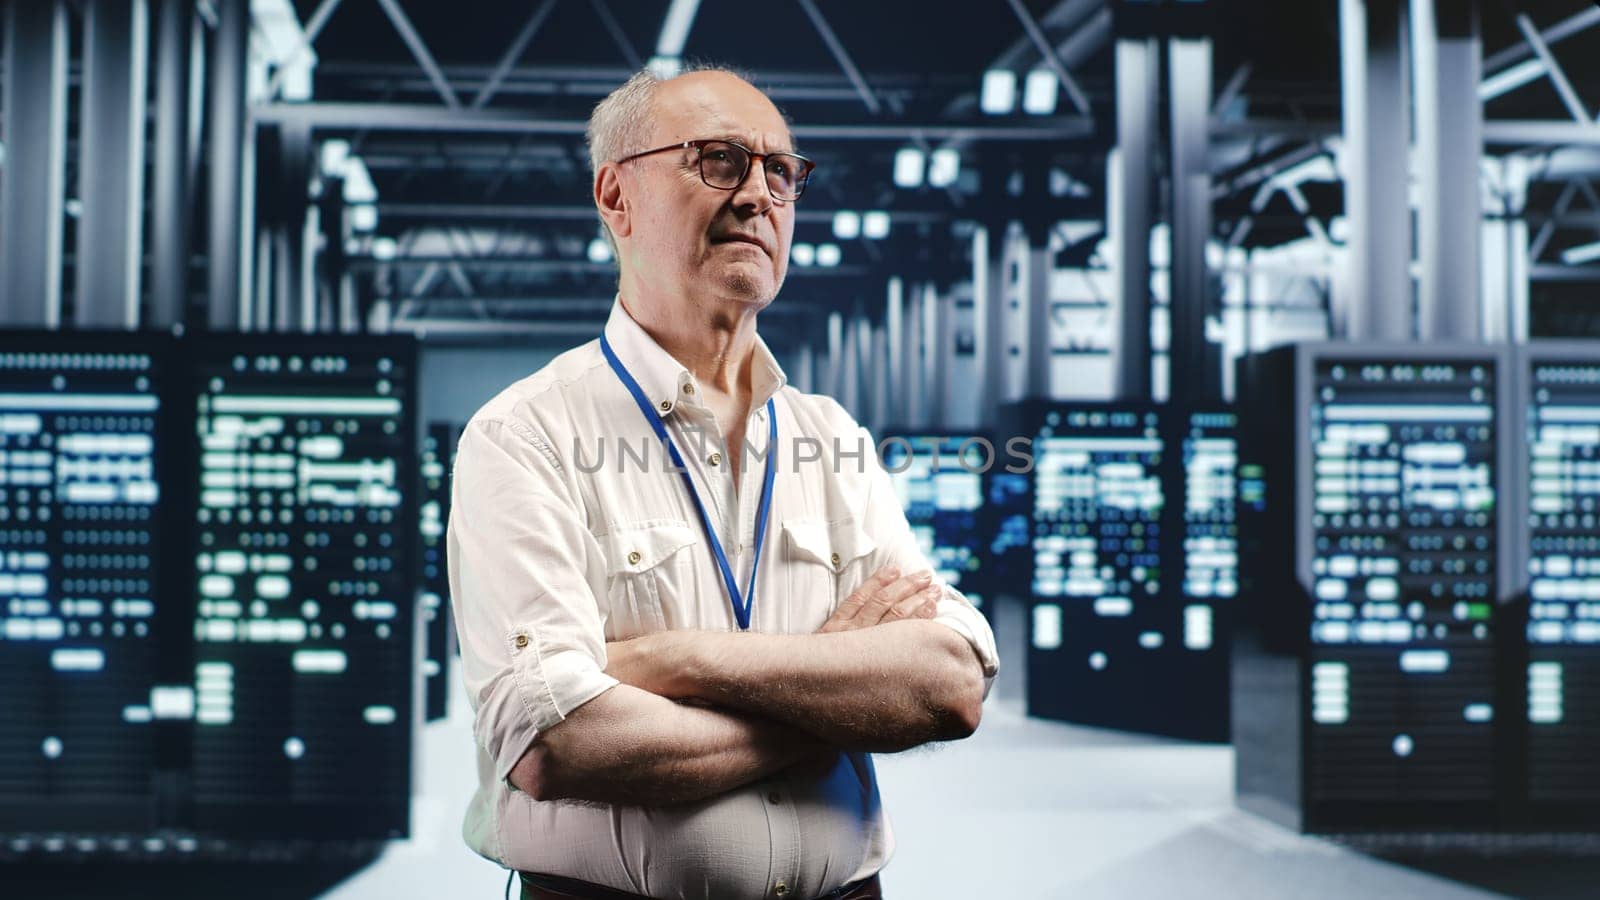 Portrait of elderly engineer looking around modern server room in data center, preparing to start comission on malfunctioning high tech facility hardware rigs in order to ensure errorless operations